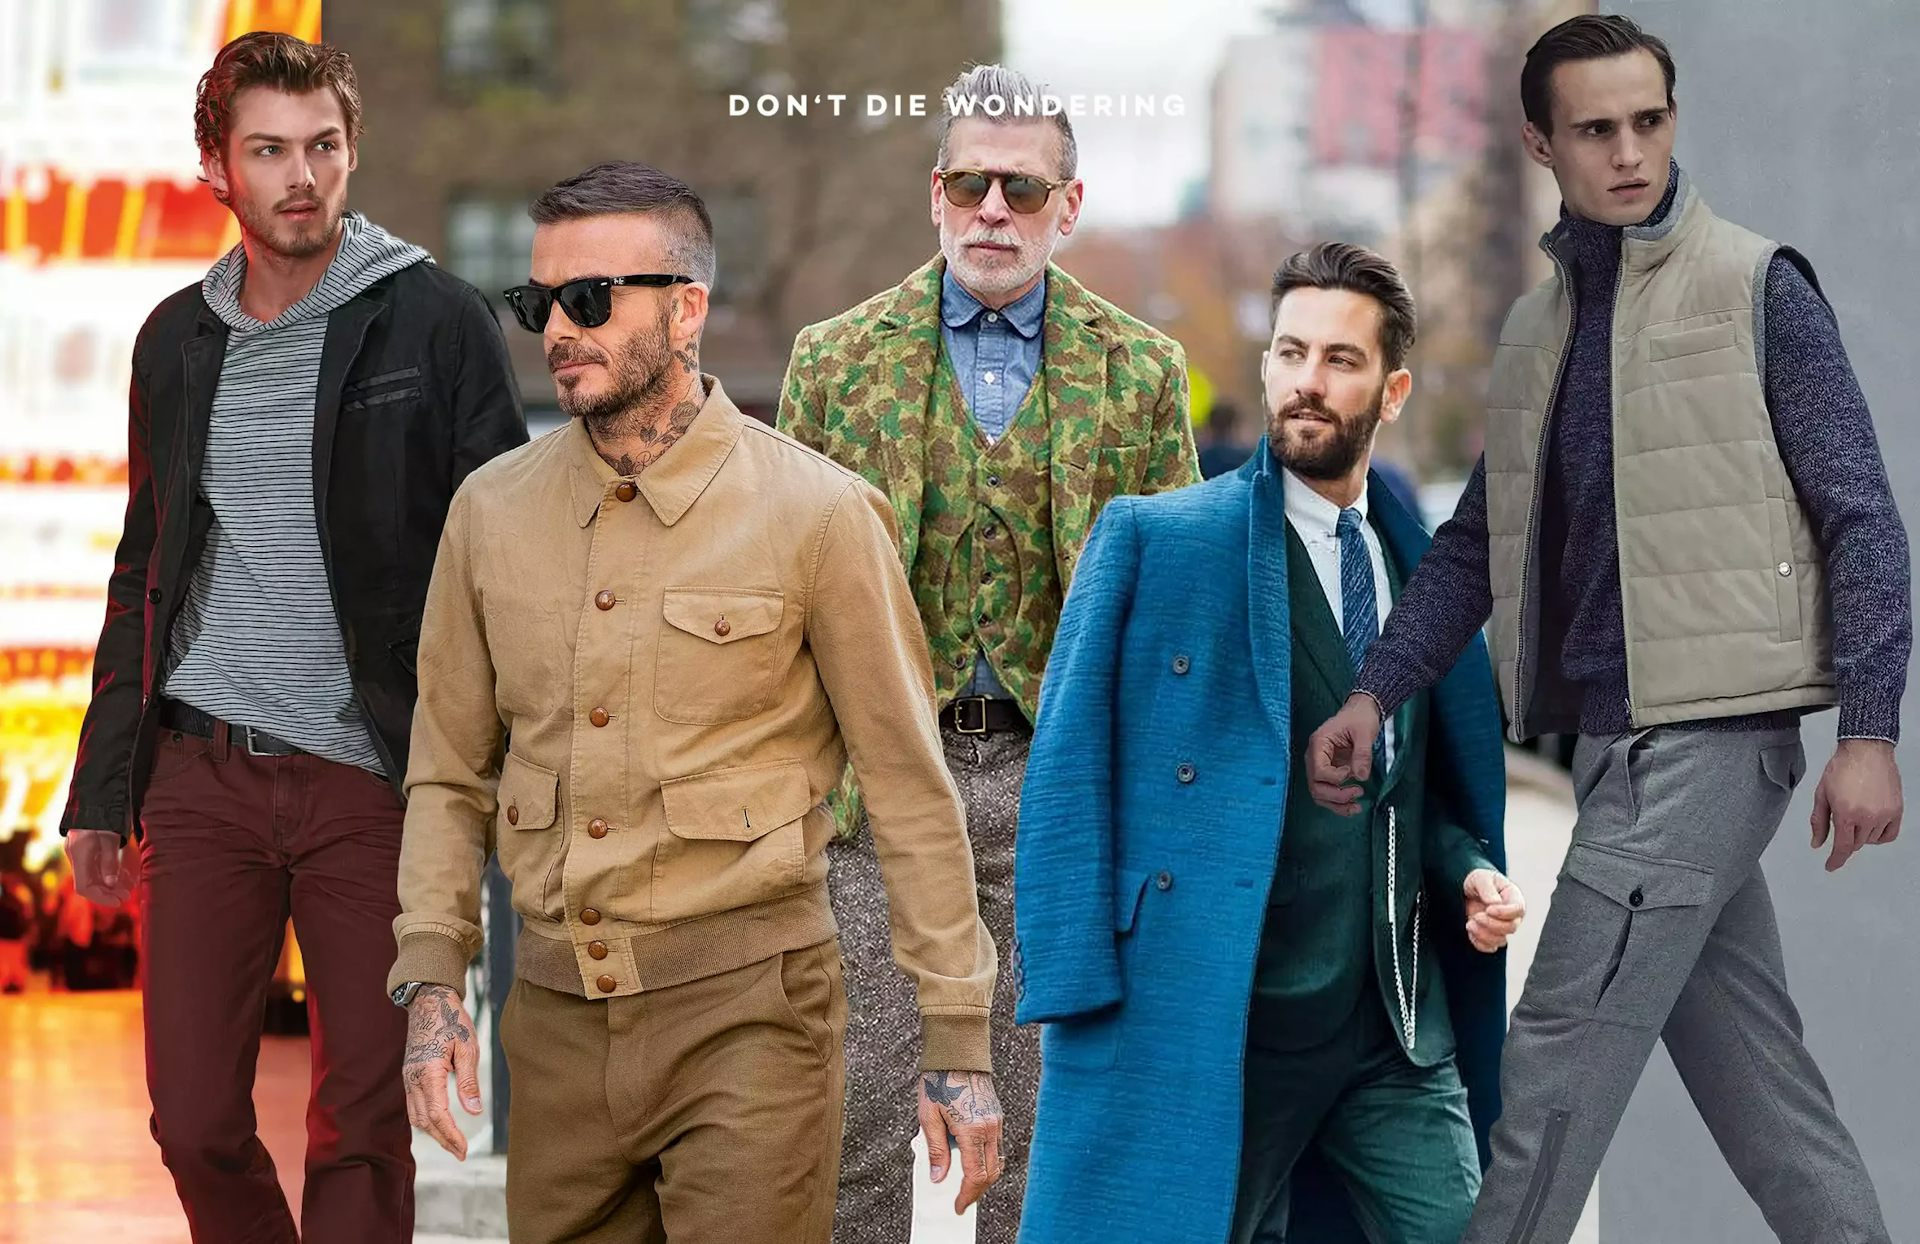 Menswear Fashion Trends Throughout The Decades | It’s All Rock’n’Roll